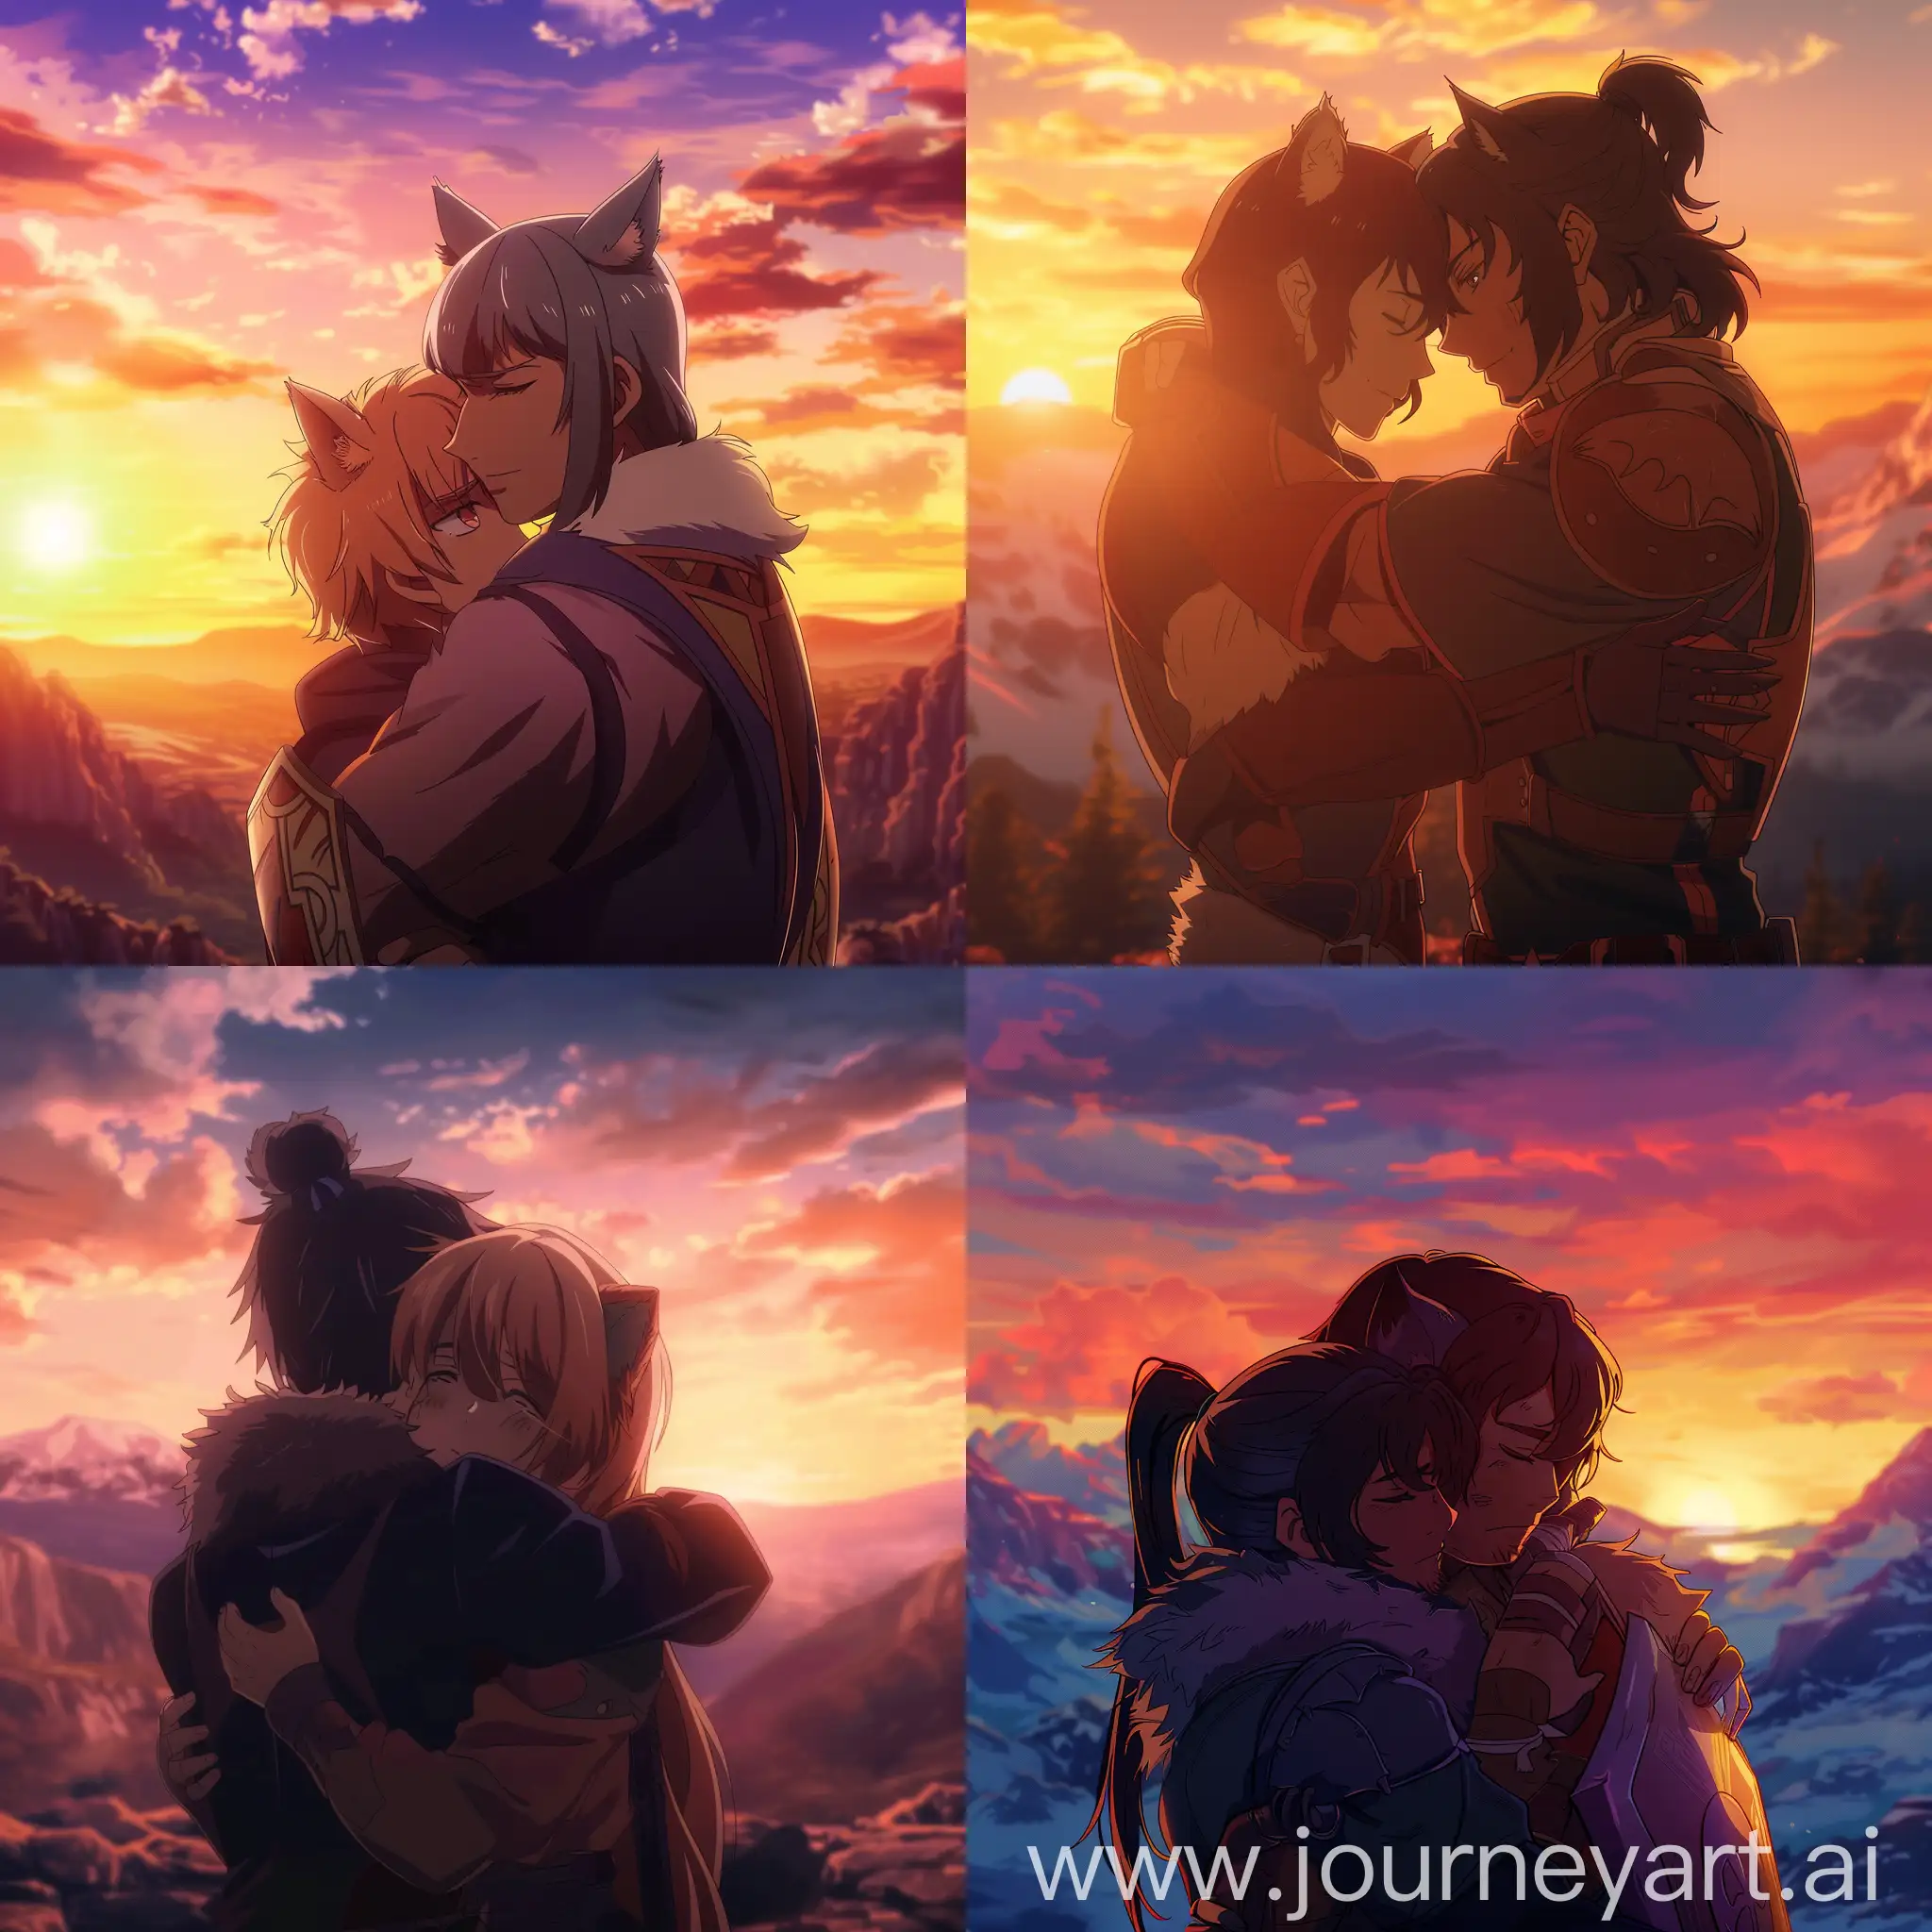 Anime-Hero-Shield-Character-Embraces-Companion-at-Sunset-Against-Mountain-Backdrop